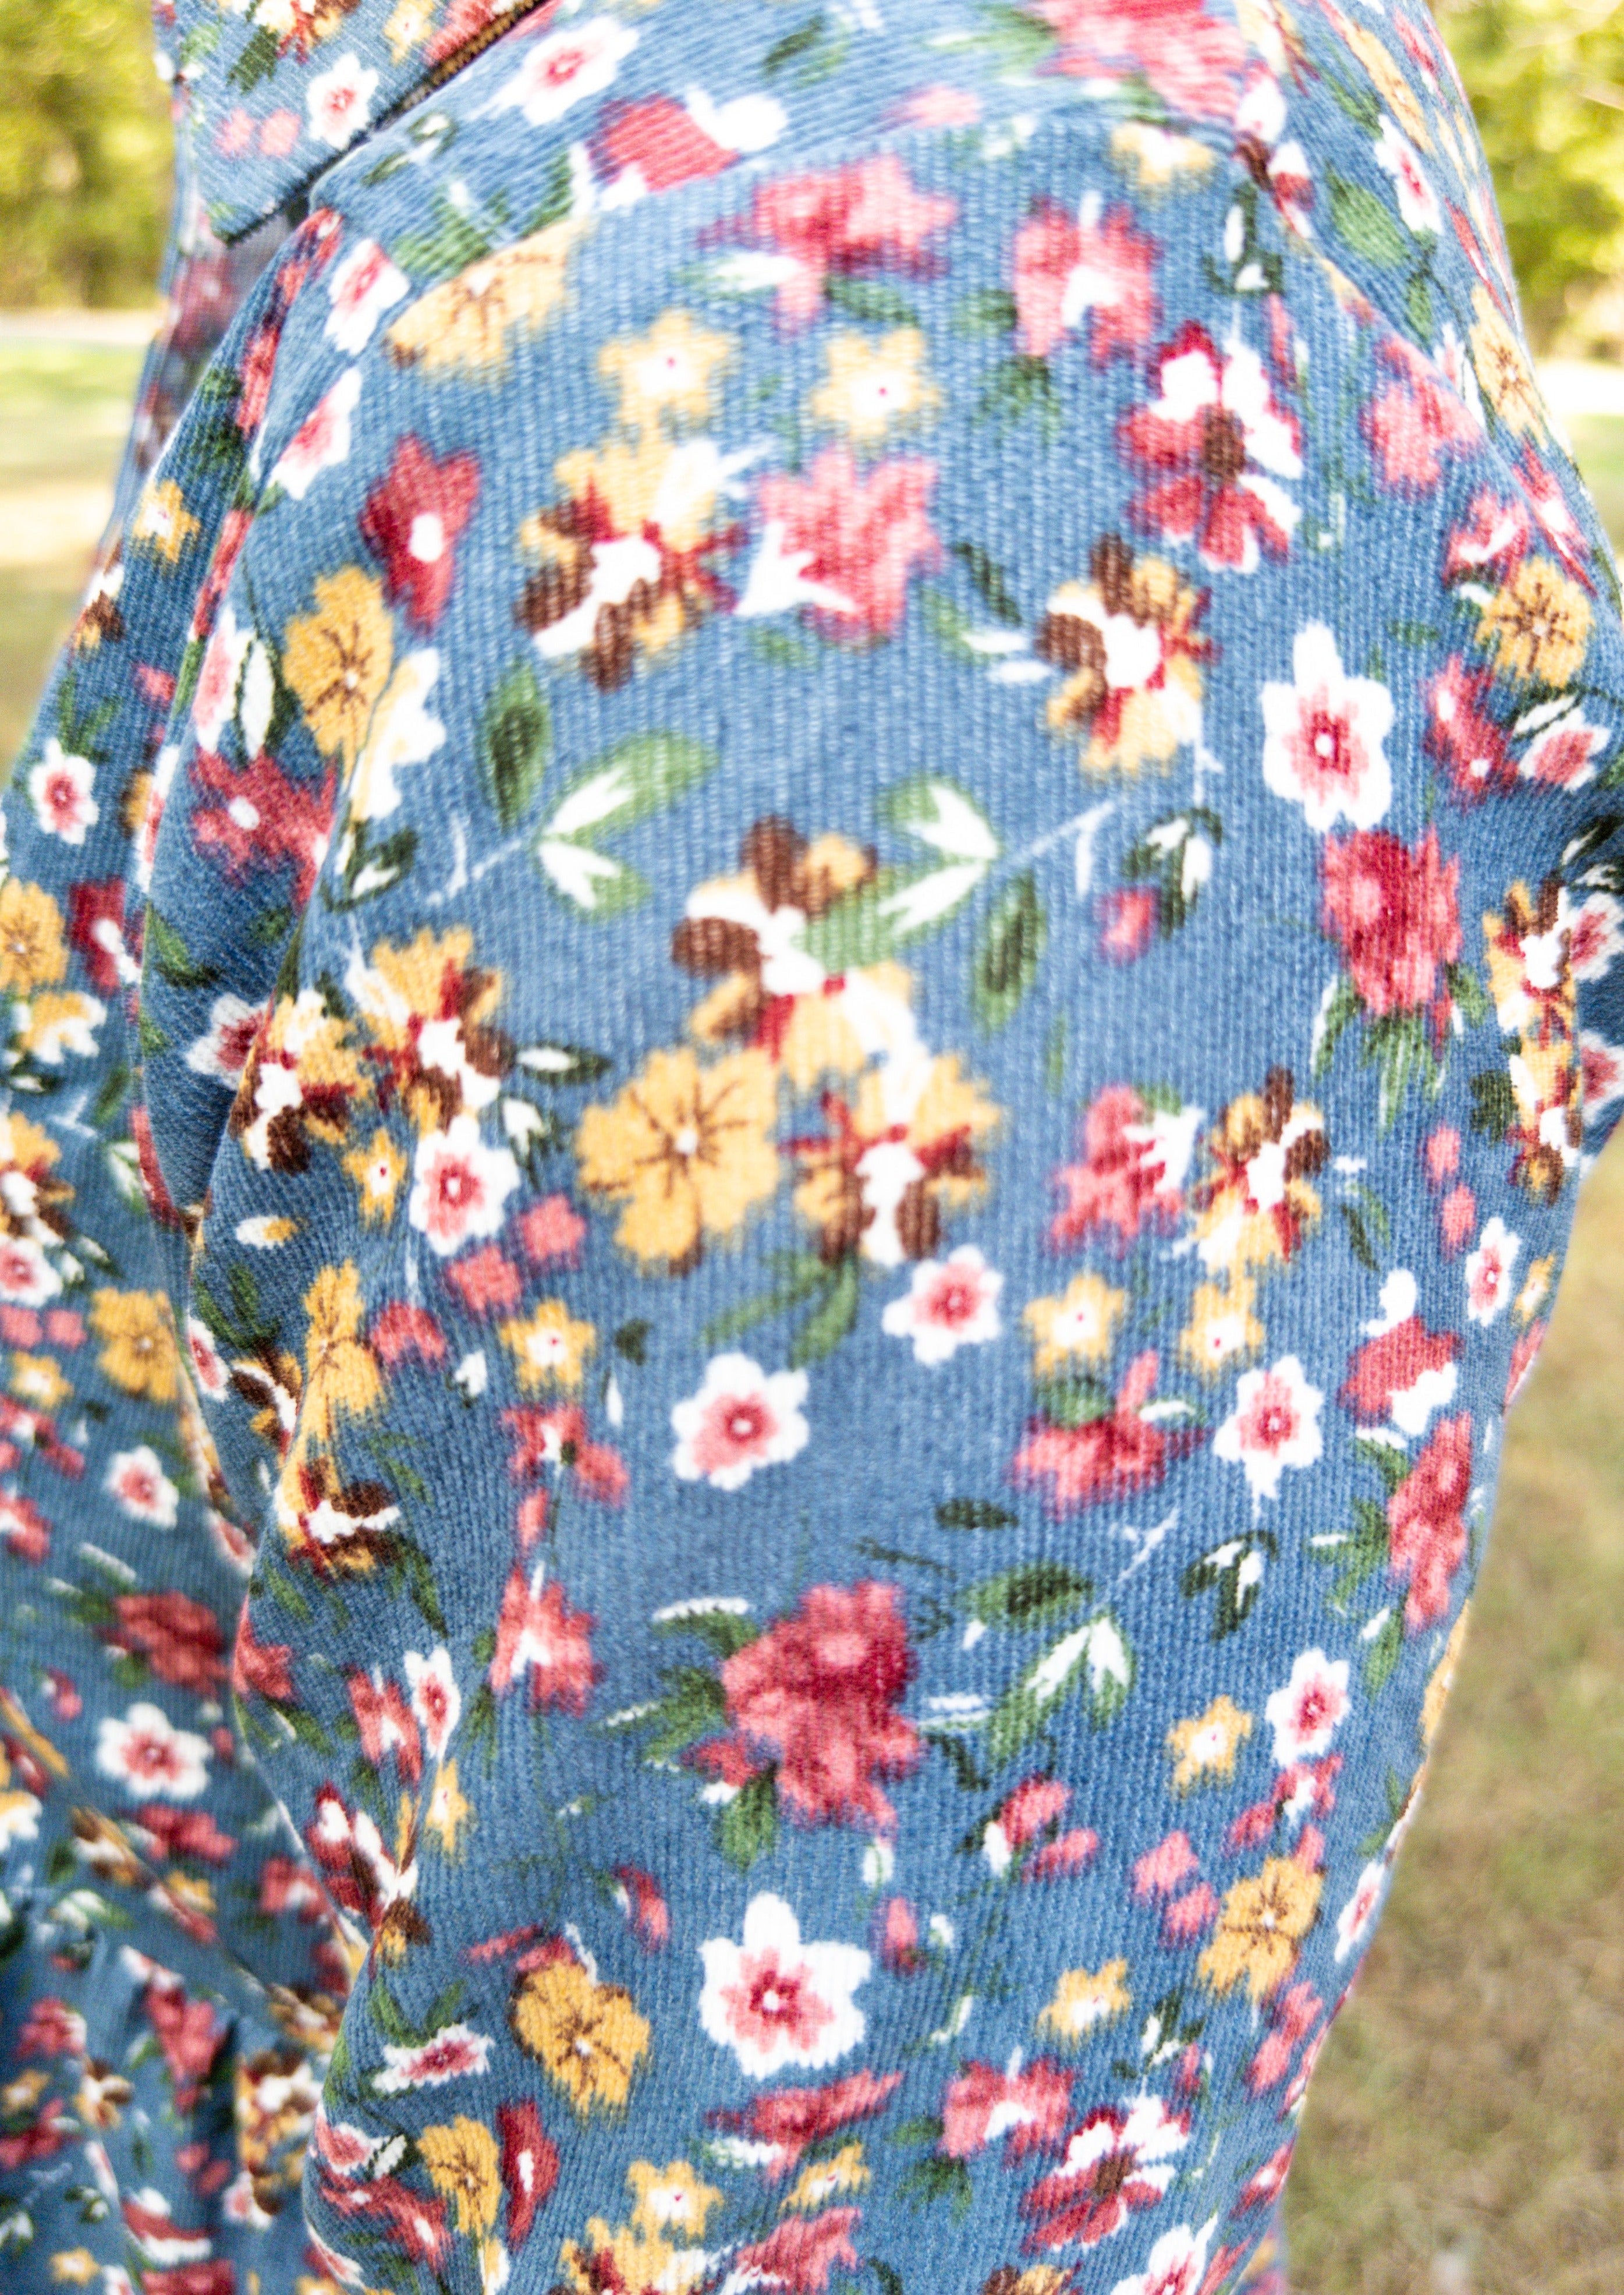 Close up side view of the dusty blue corduroy dress. It shows the texture from the corduroy and the pink, yellow, white, and green floral print.